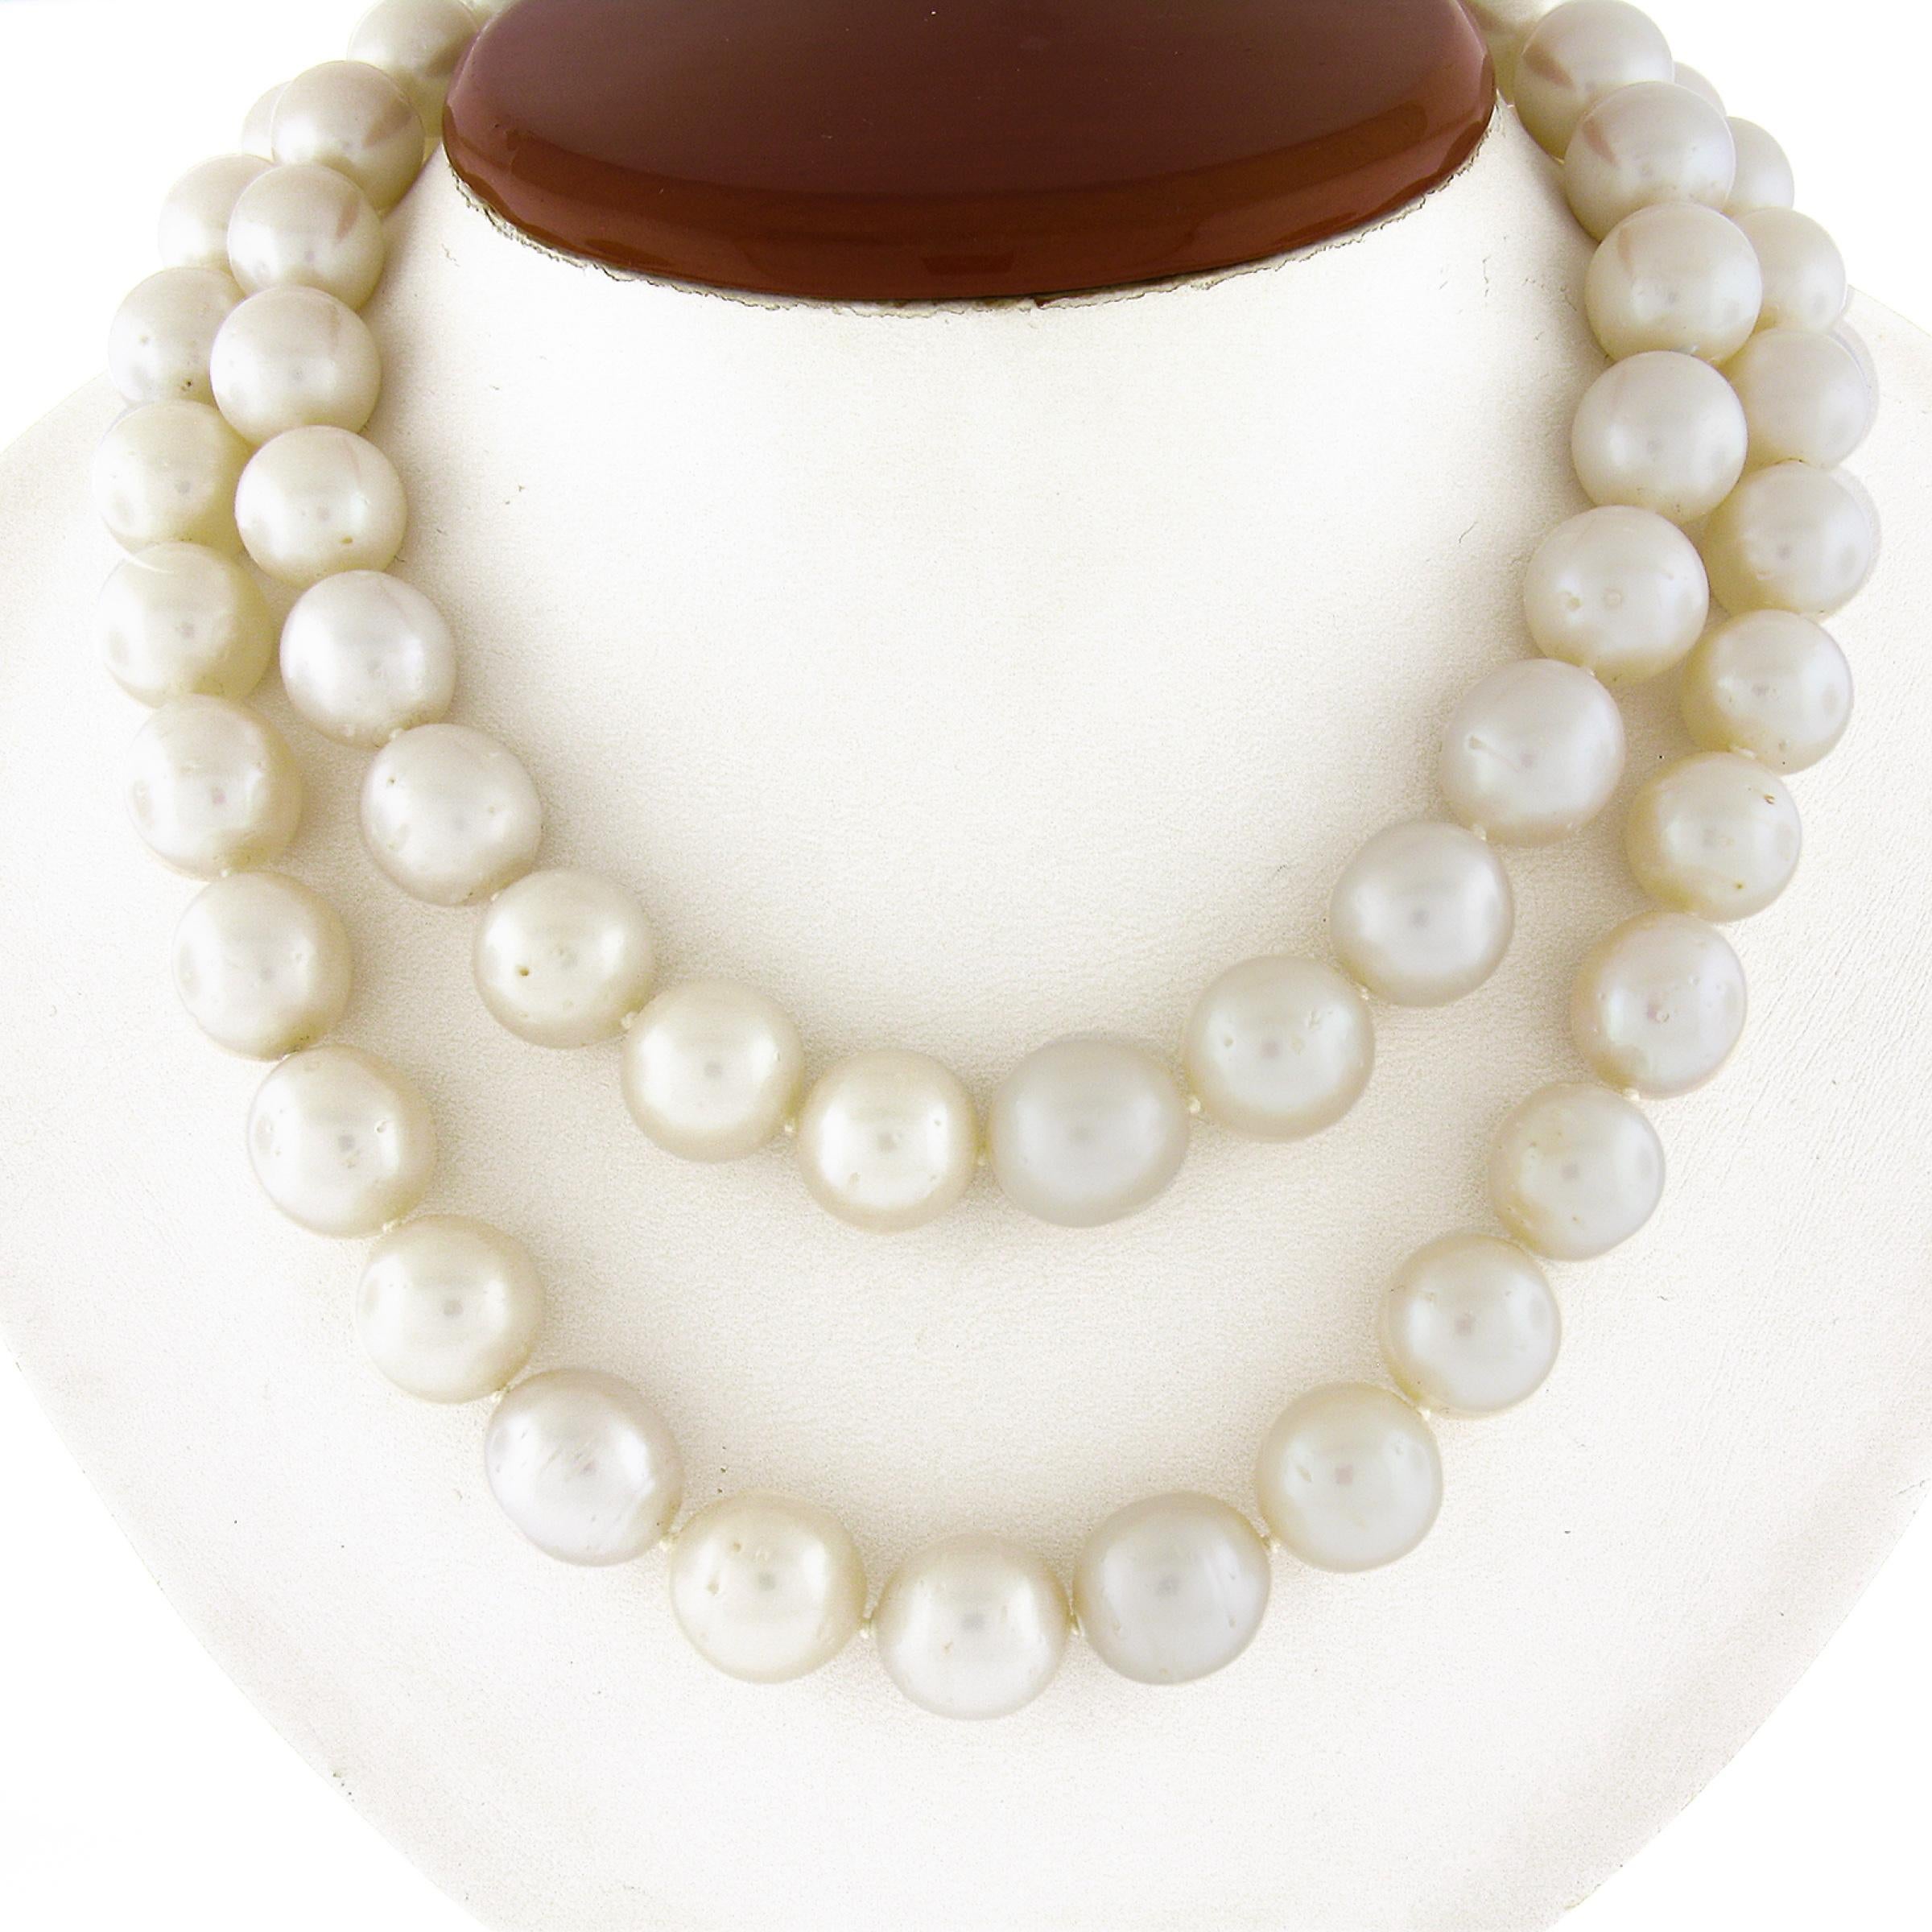 --Stone(s):--
(62) Genuine Cultured South Sea Pearls - Near-Round, Oval & Button - White Color - 11.73mm to 14.60mm
** See Certification Details Below for Complete Info **

Weight: 202.34 Grams
Length: 33 Inches (wearable length)
Clasp: No Clasp -